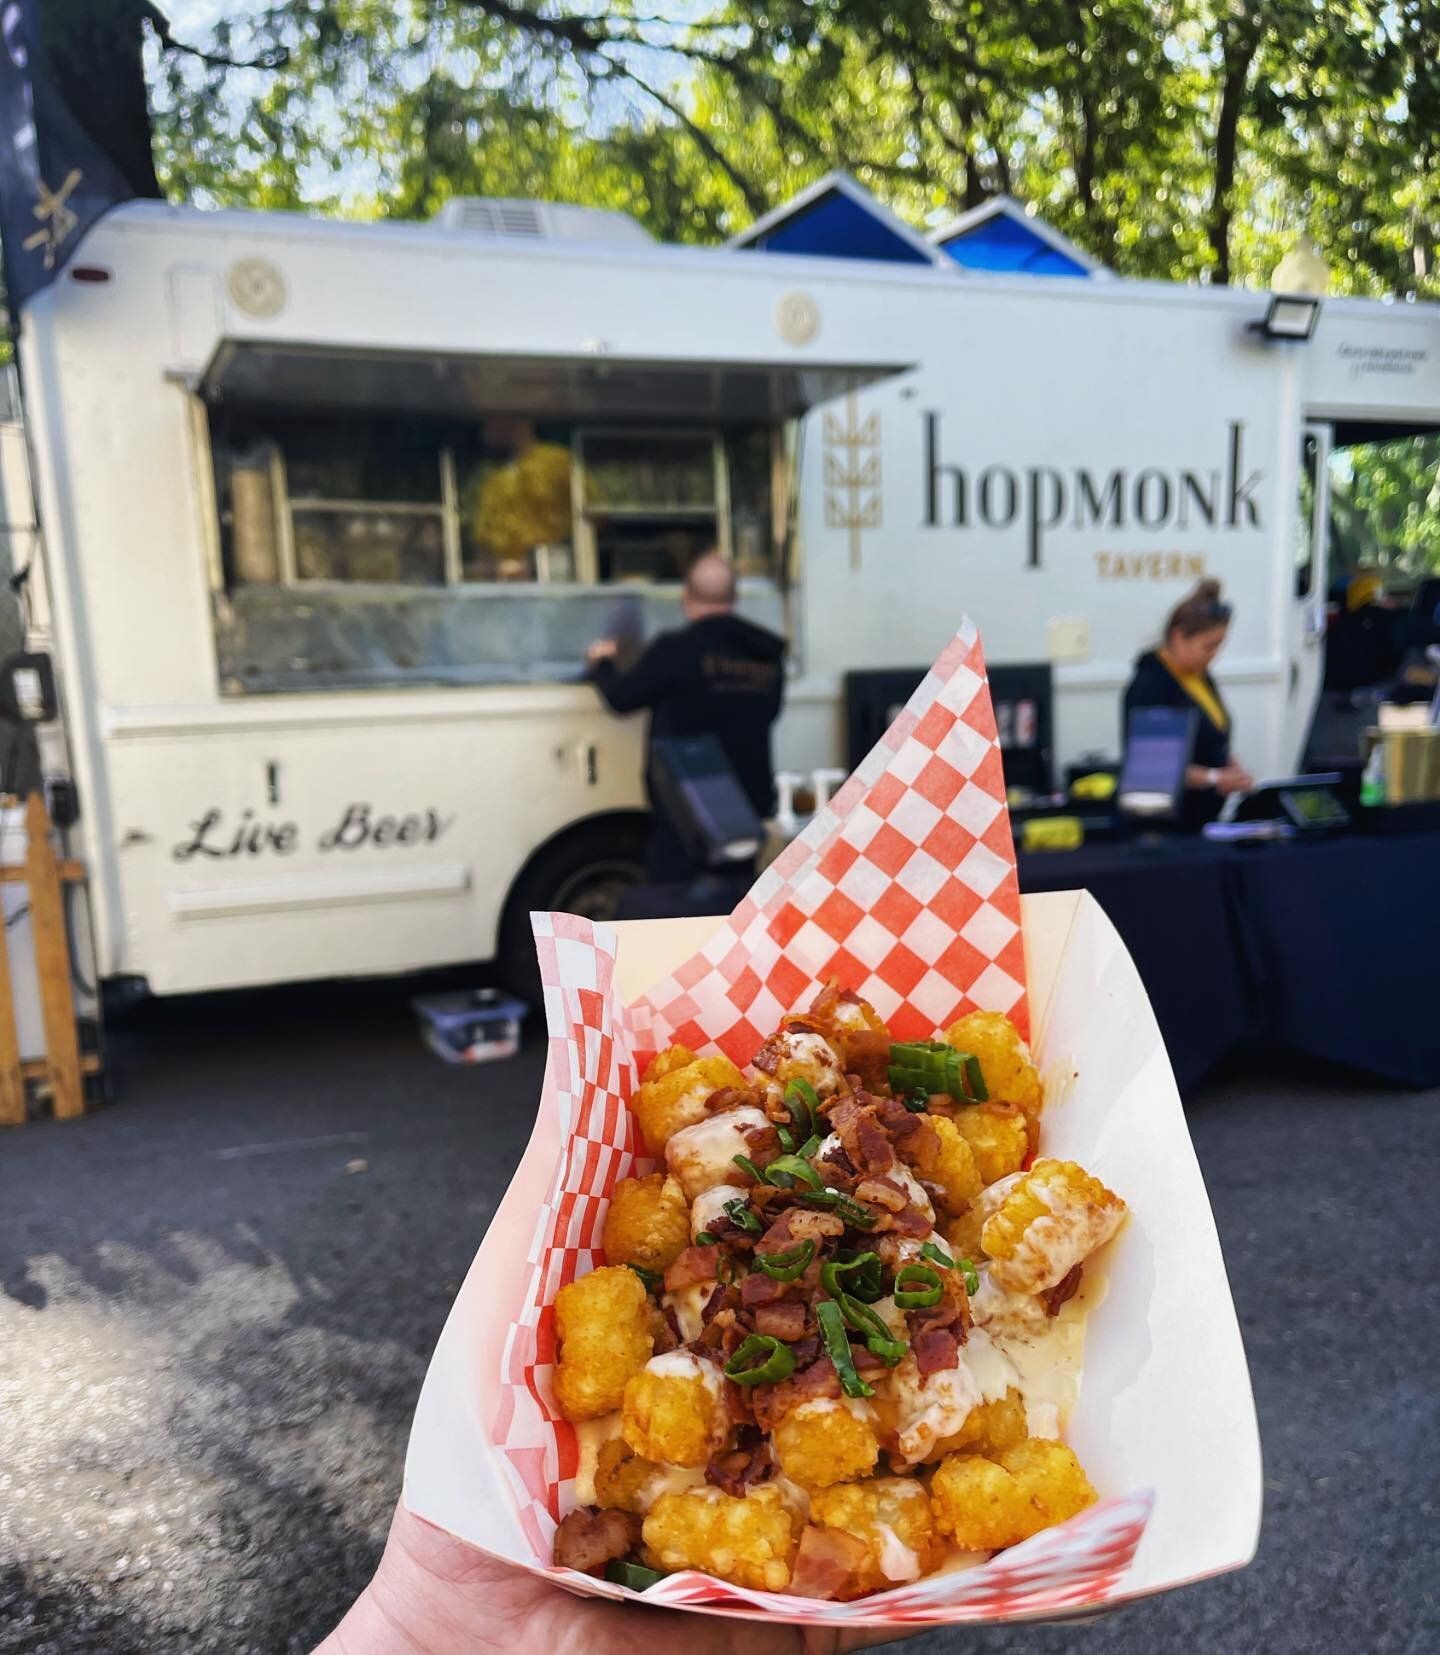 Hey there spuddy! Come try our new loaded tots at the Tuesday Night Market on Sonoma Plaza! 

#hopmonkmobile #sonomacounty #tuesdaynightmarket